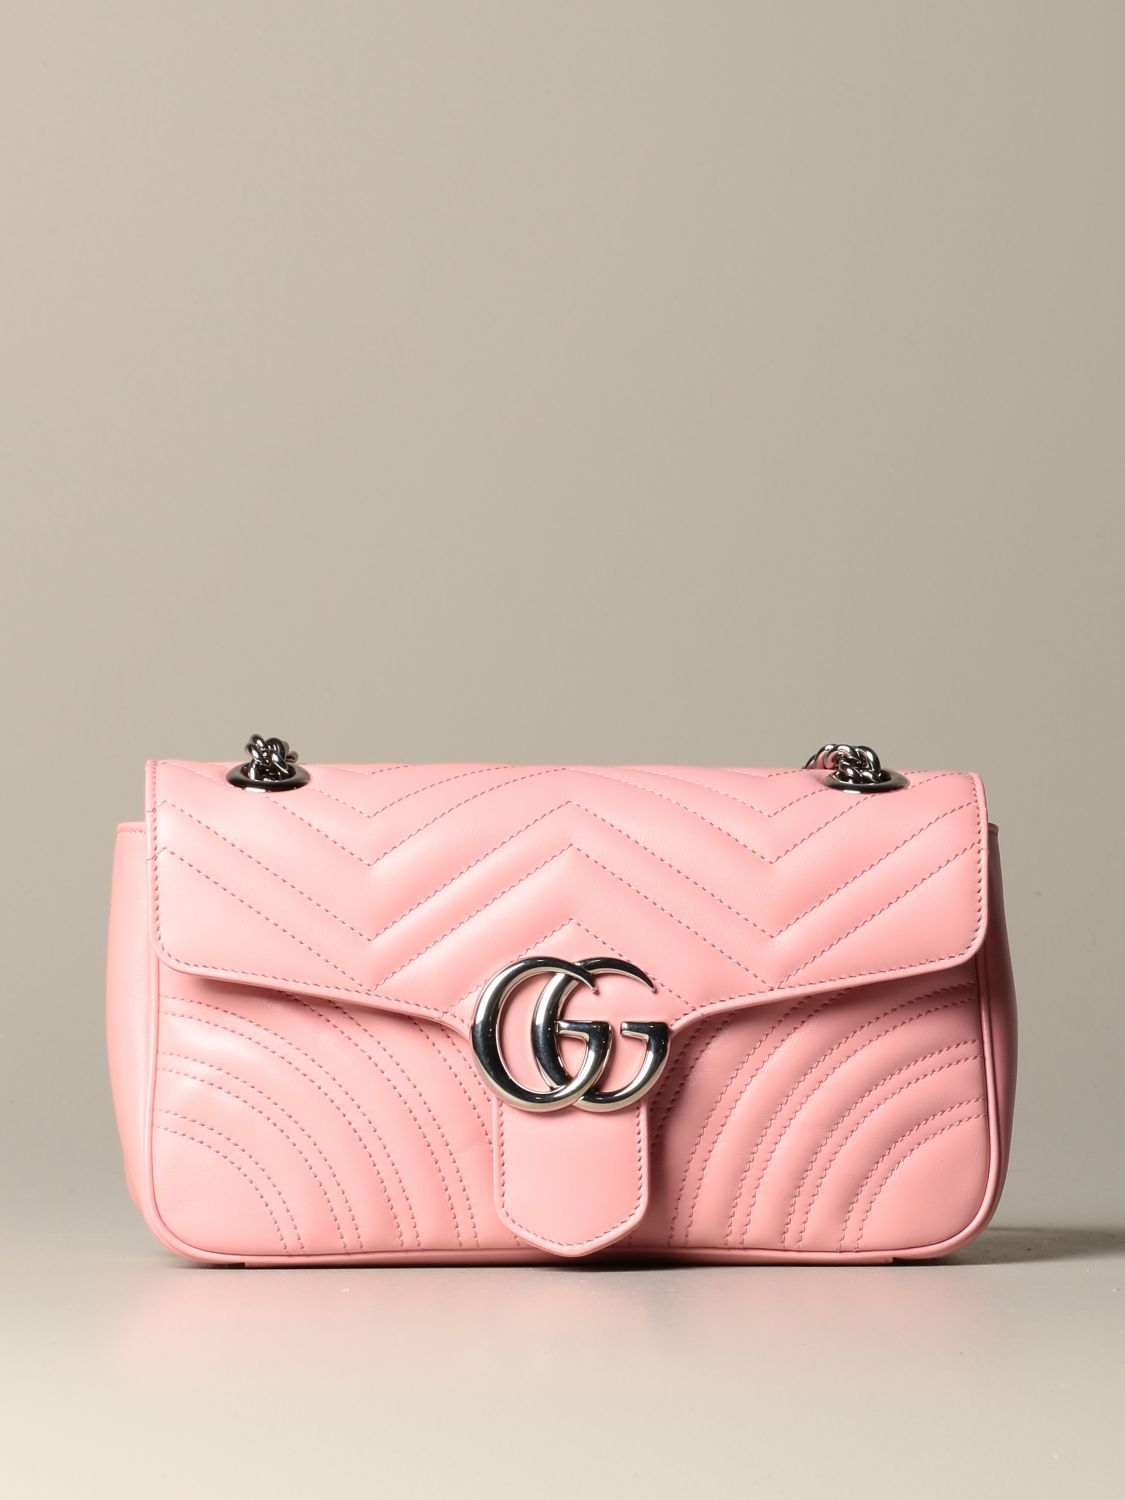 GG Marmont Medium Leather Wallet in Pink - Gucci